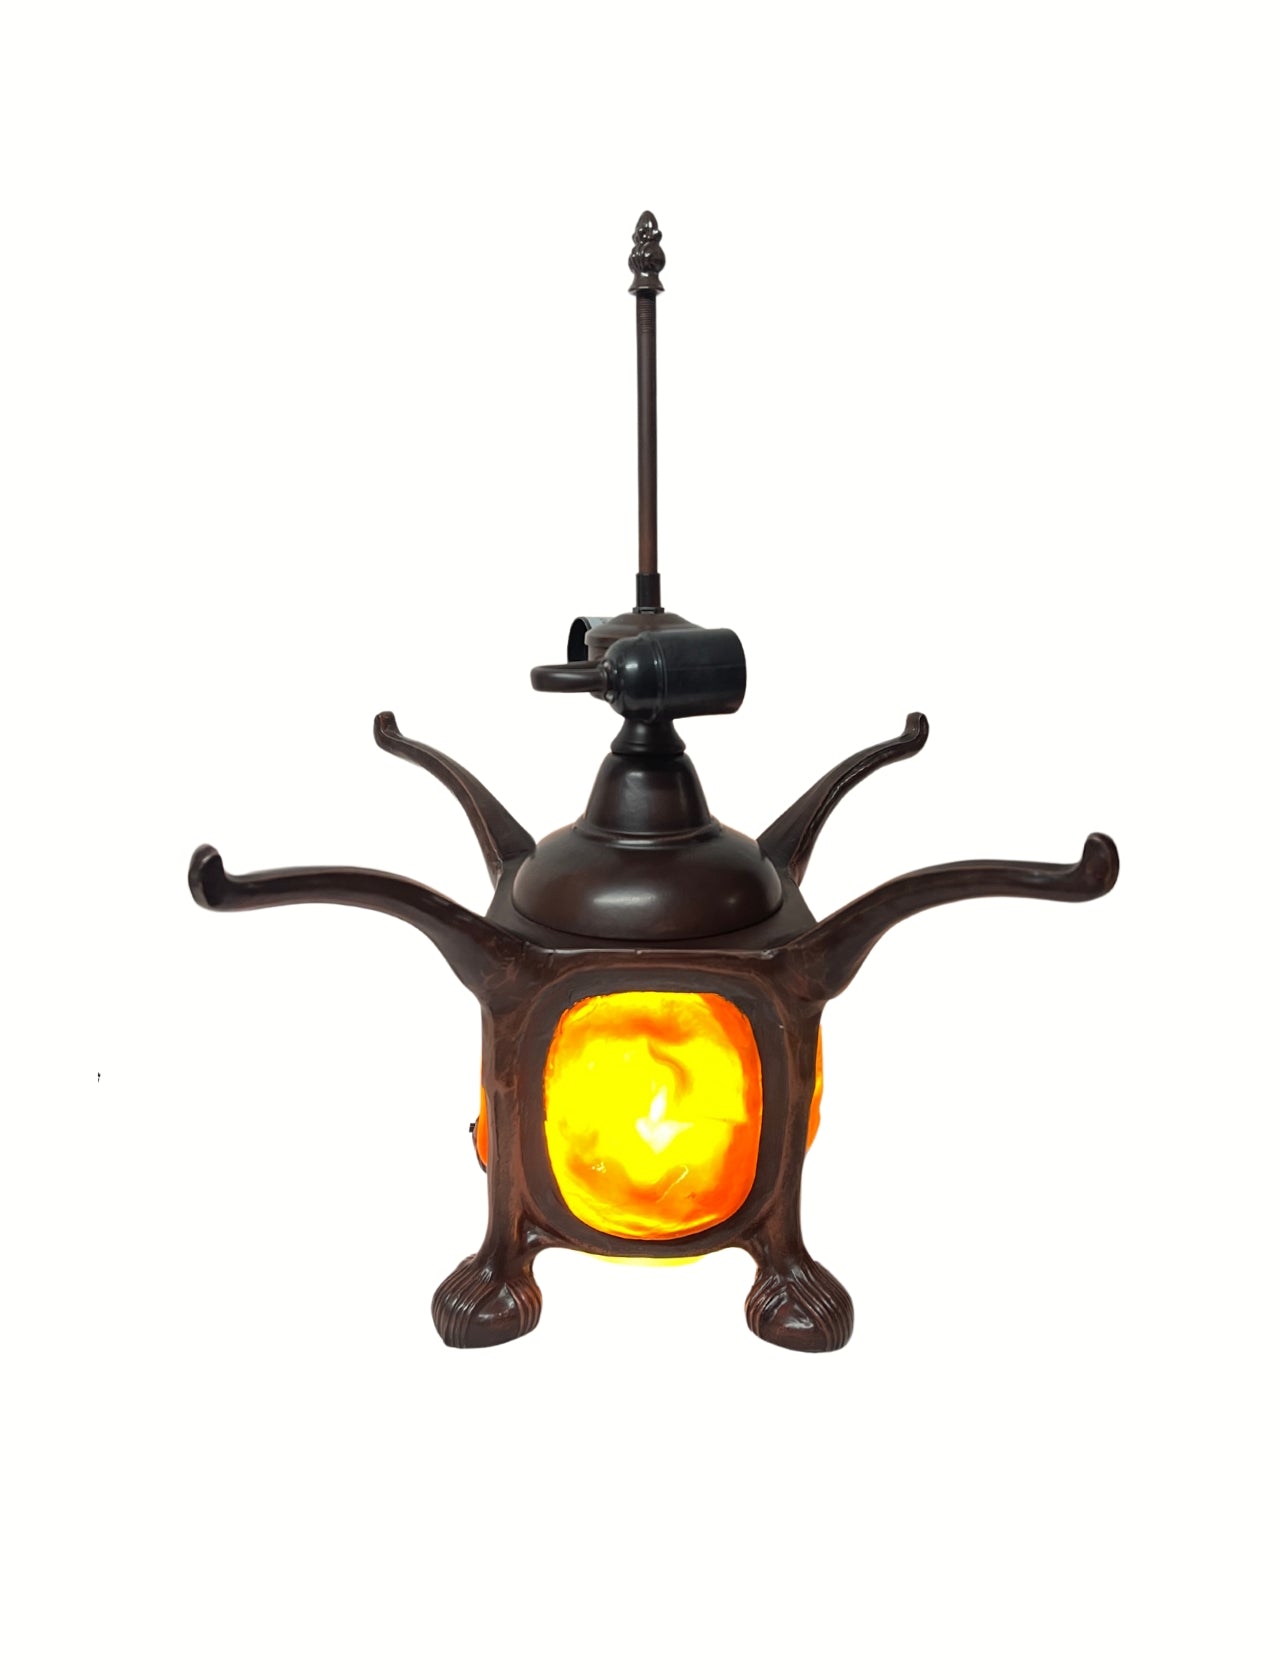 Legend Collection@16" Tiffany Magnolia Table Lamp  With "Turtleback Tile" Lighted base